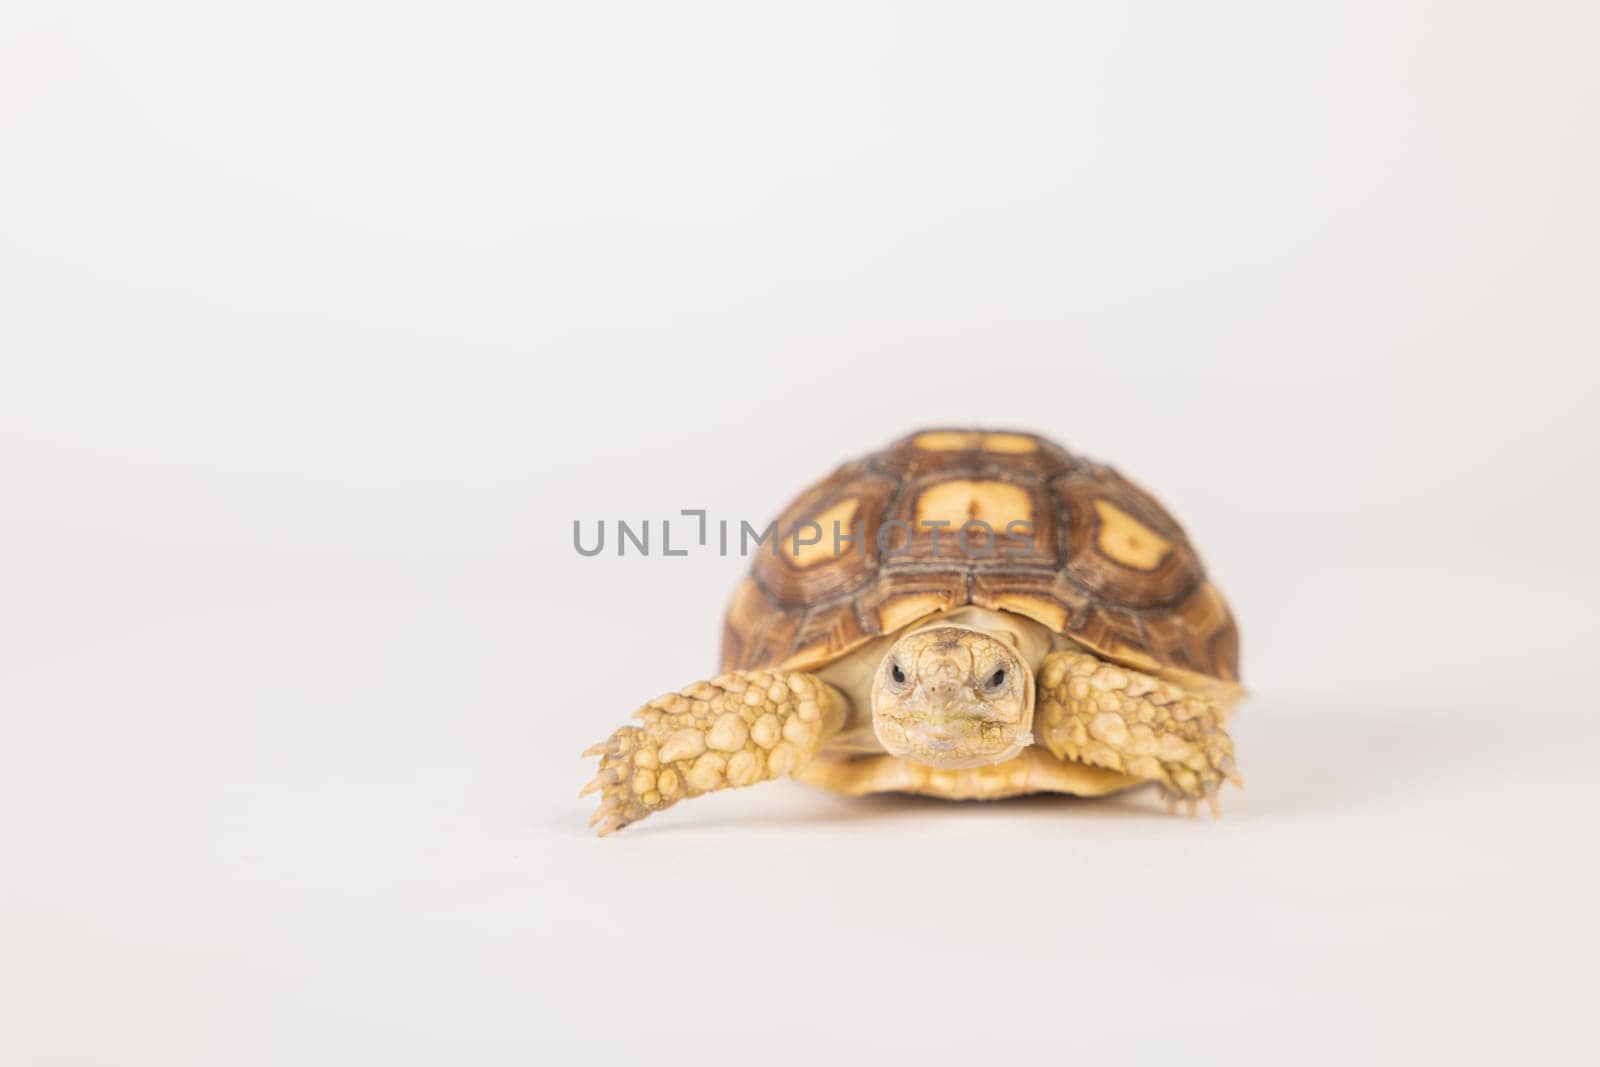 An isolated portrait of a little African spurred tortoise, also known as the sulcata tortoise, against a white background. This adorable reptile showcases the beauty of nature's design. by Sorapop